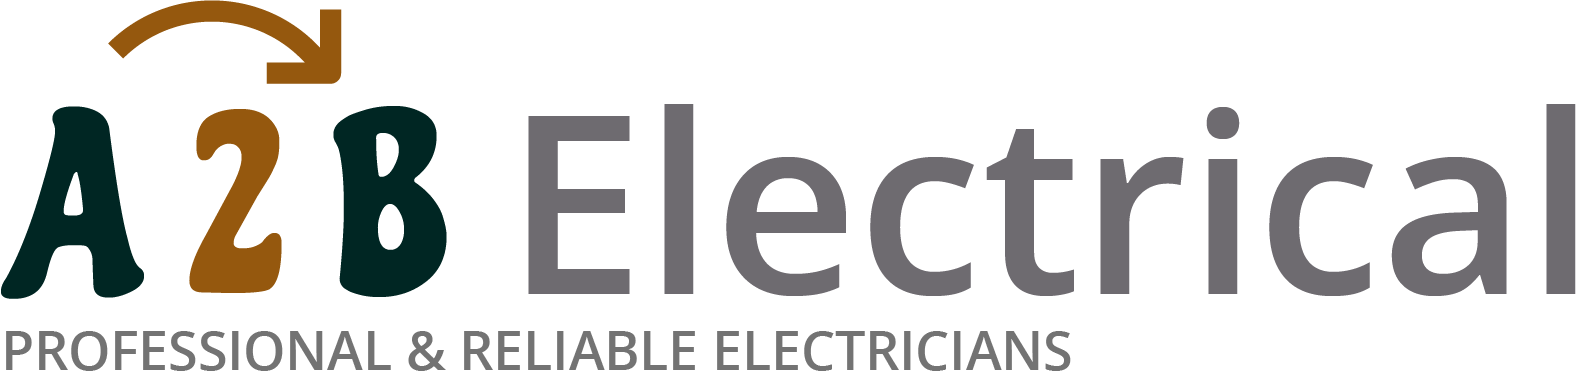 If you have electrical wiring problems in Bedworth, we can provide an electrician to have a look for you. 